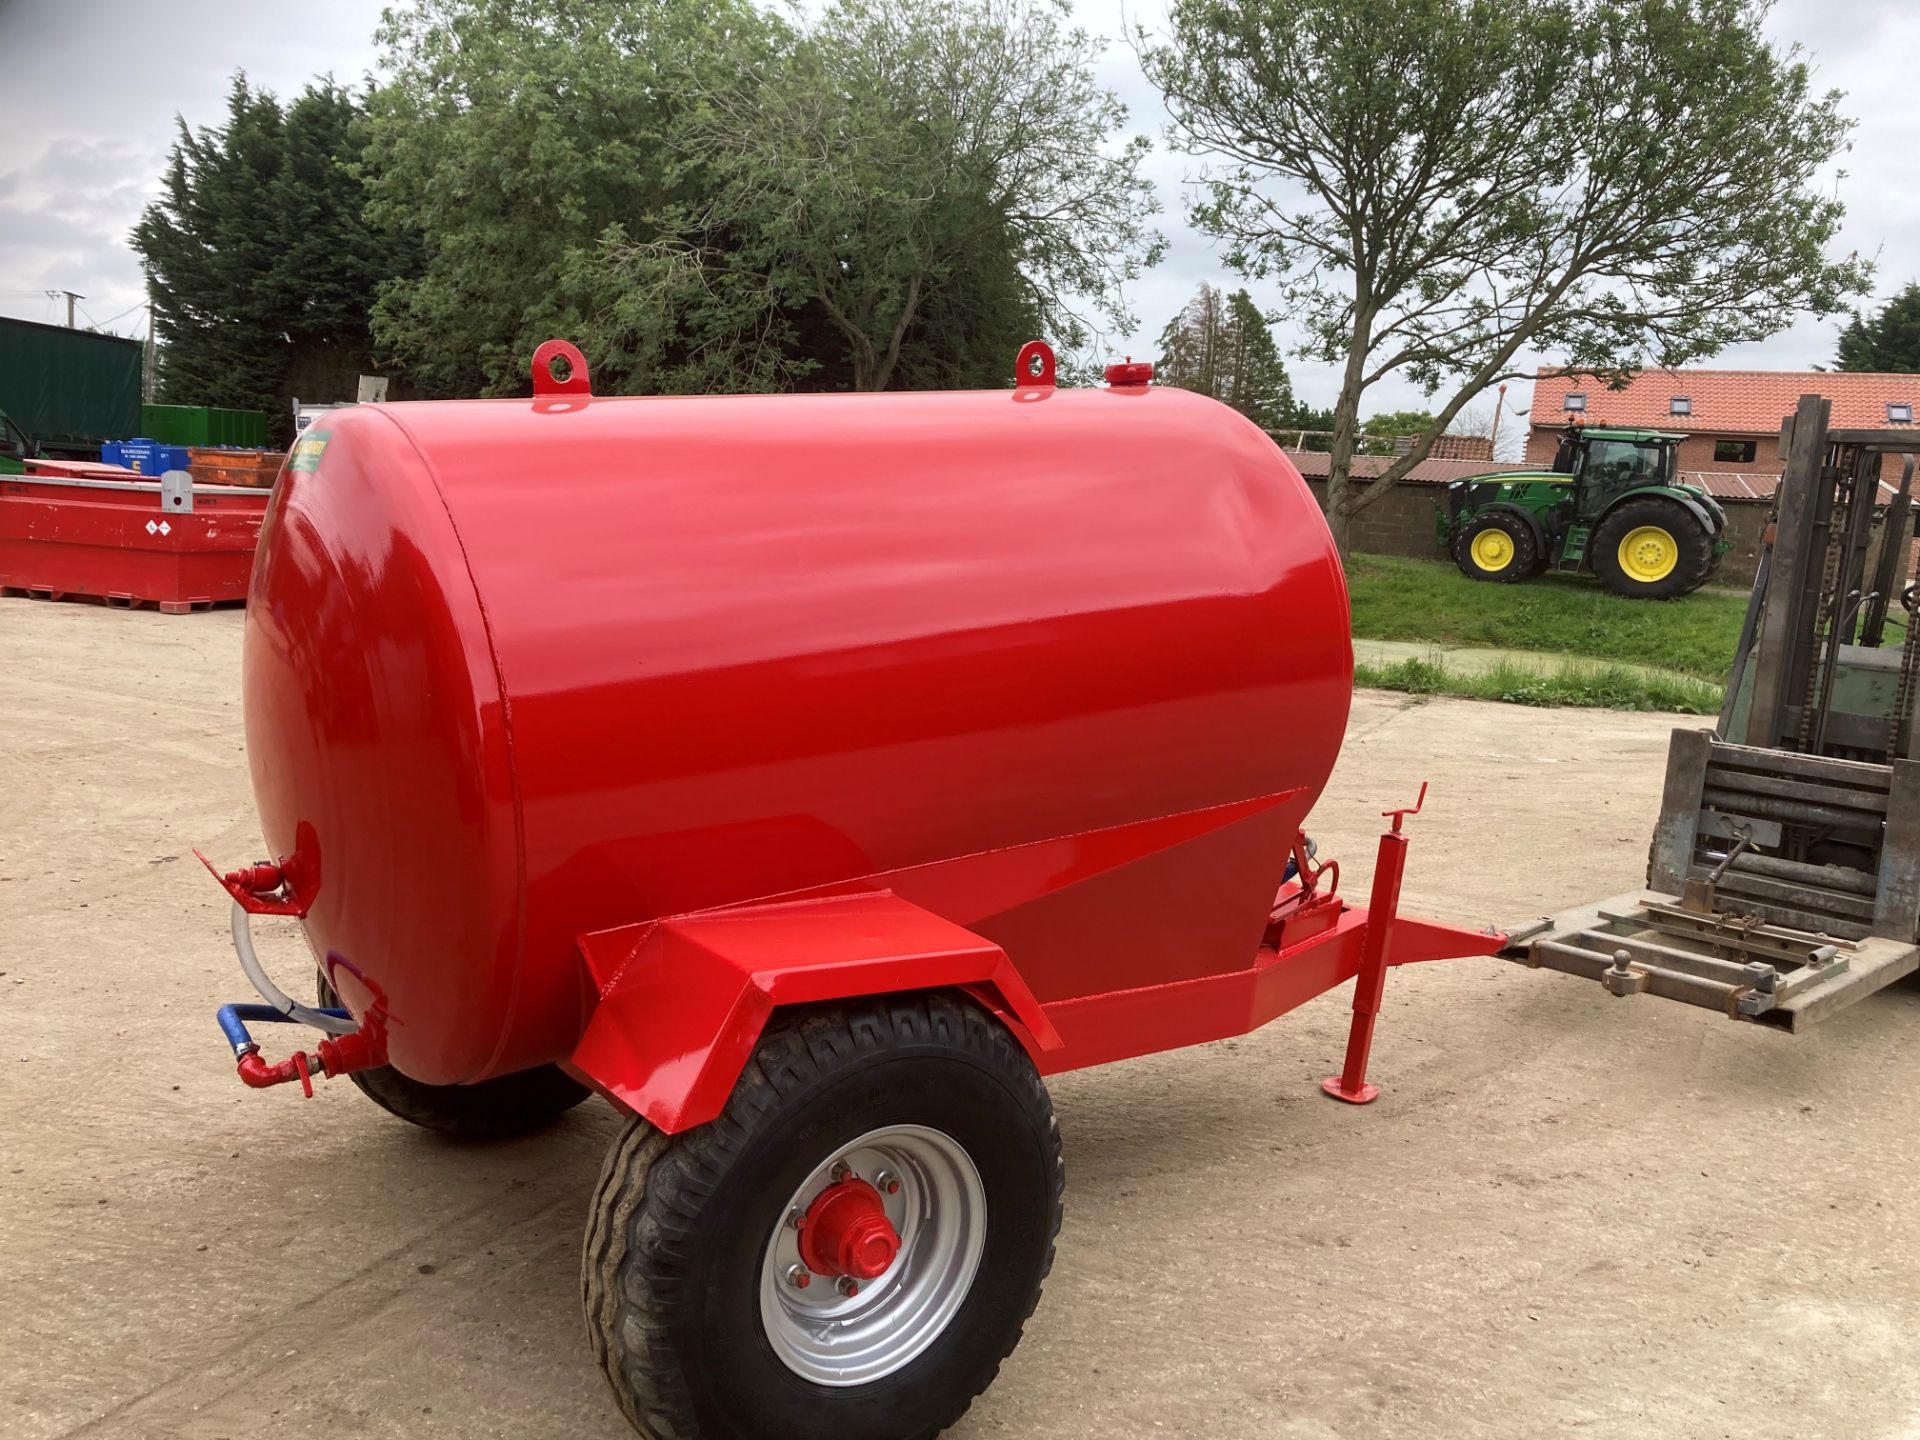 Dust suppresion Bowser, 1500 litre, good working order, Honda water pump